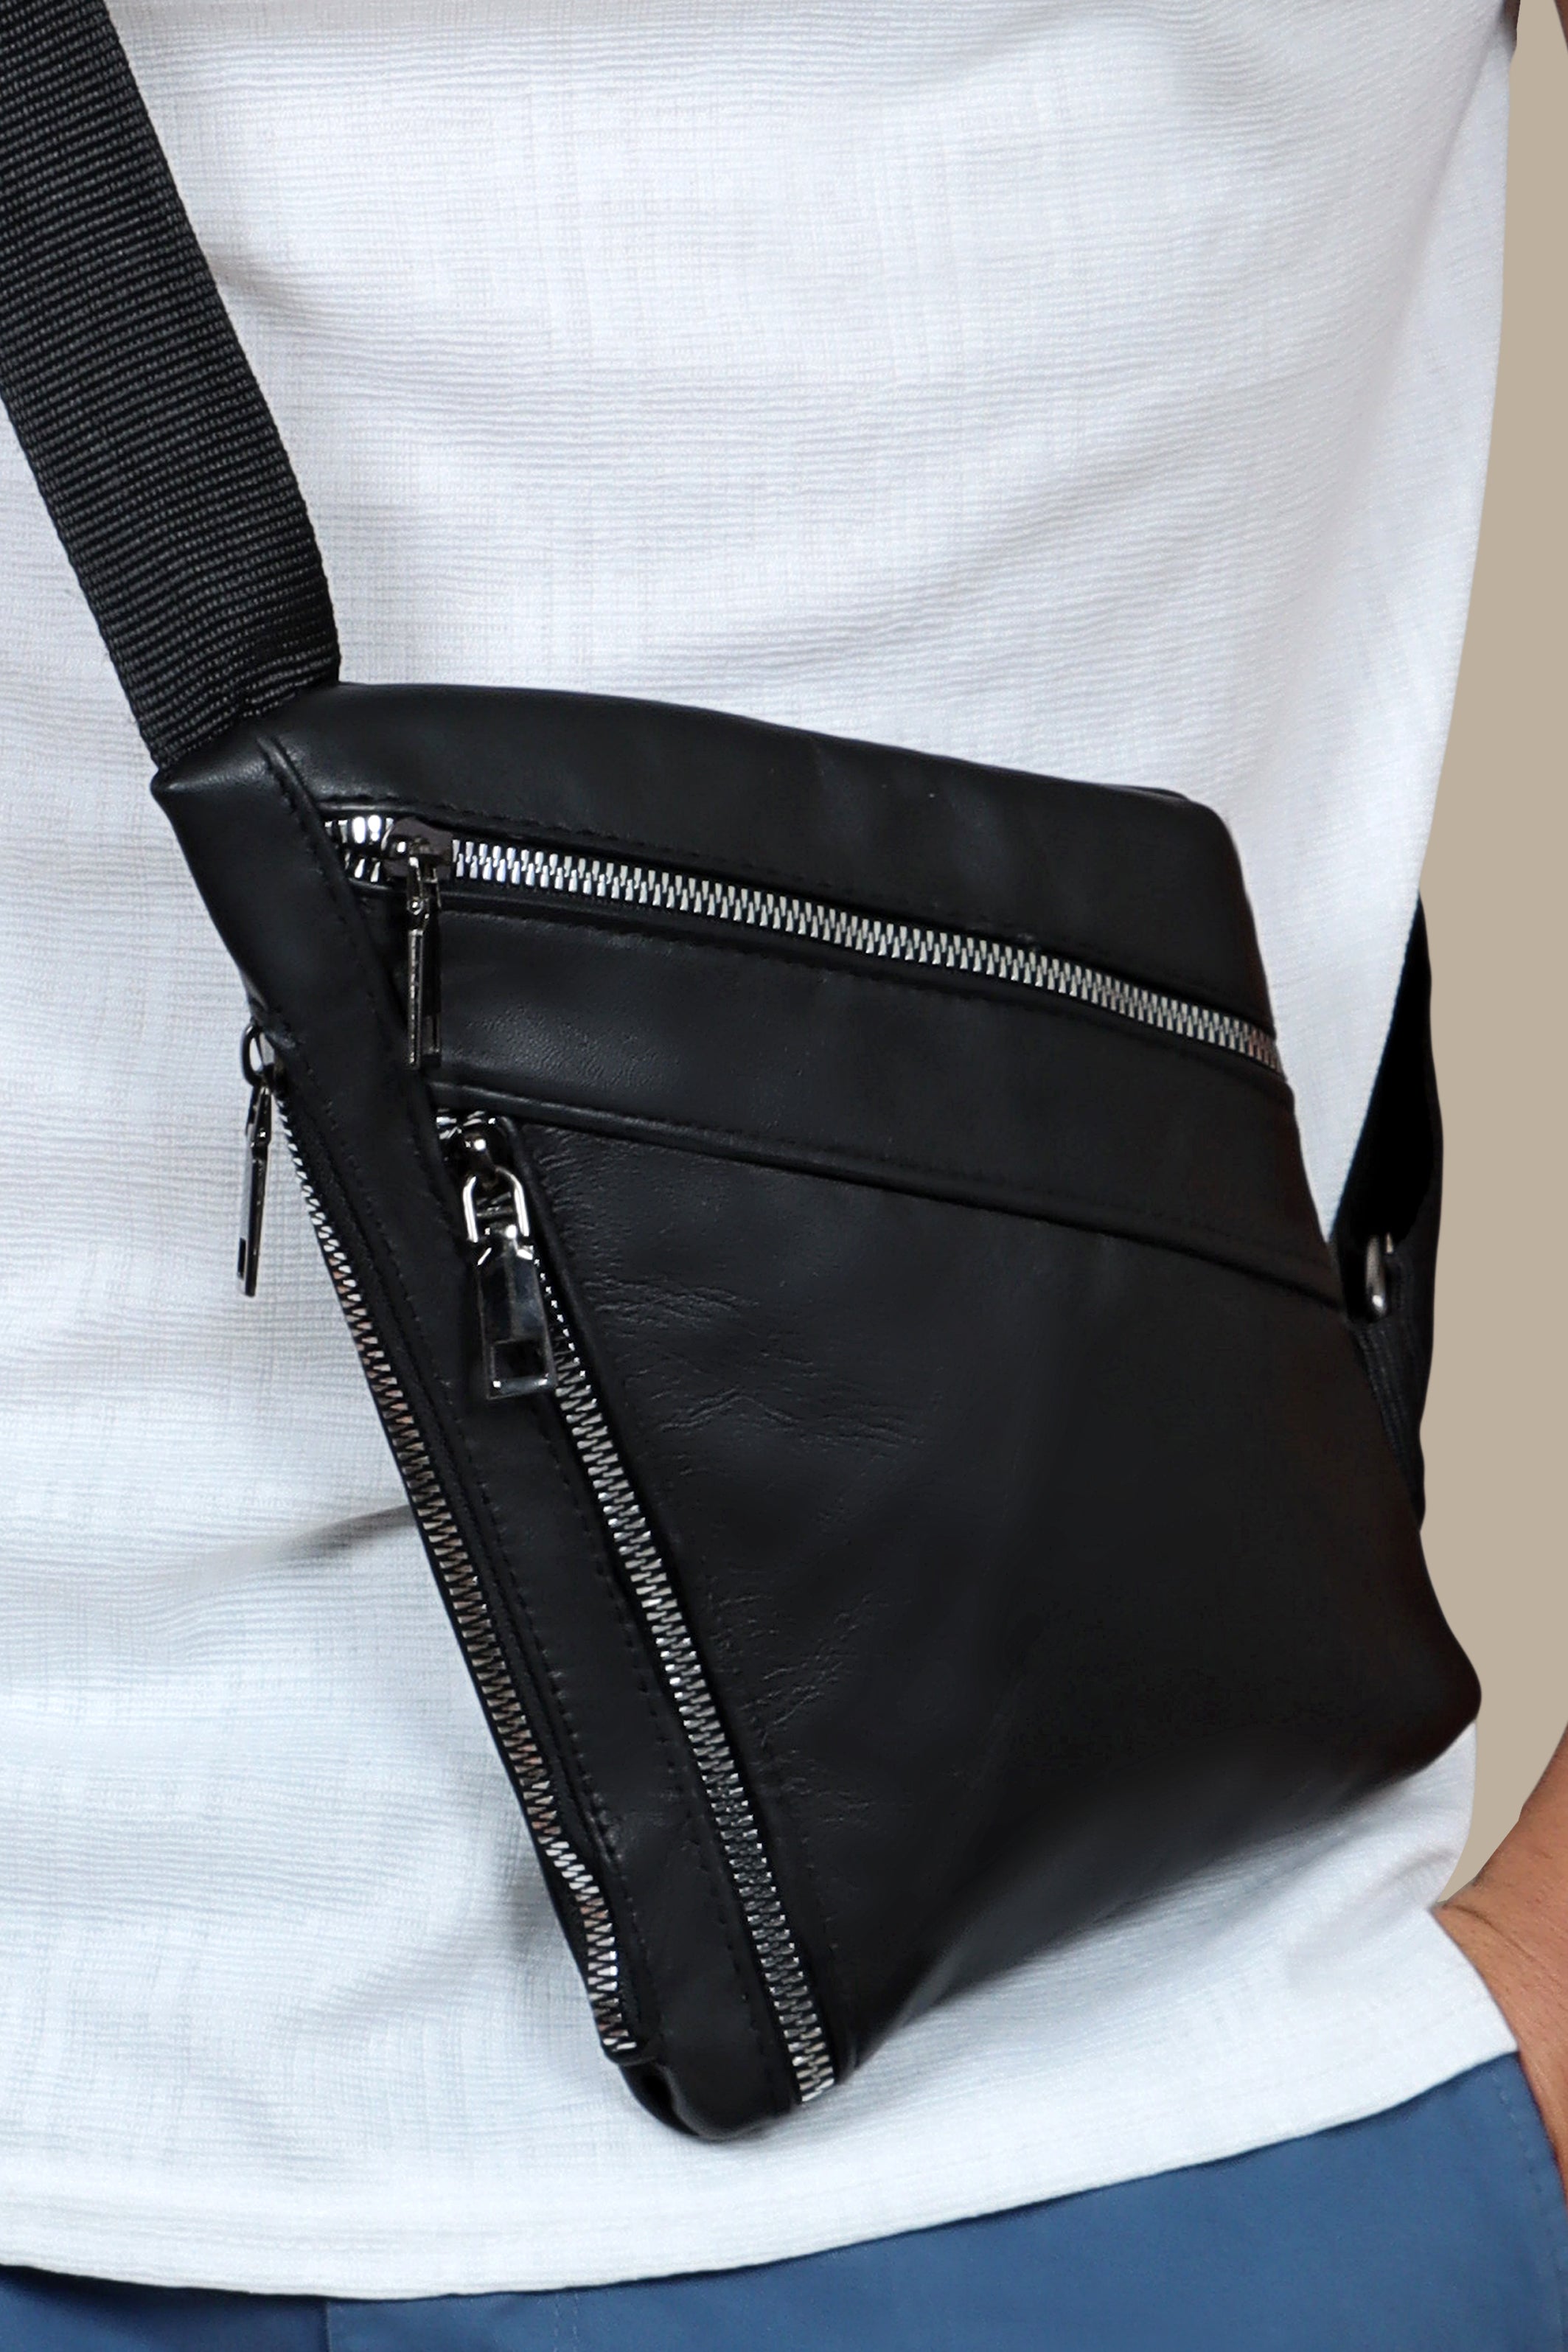 Obsidian Elegance: Black Leather Curved Crossbody with Quad Zippers